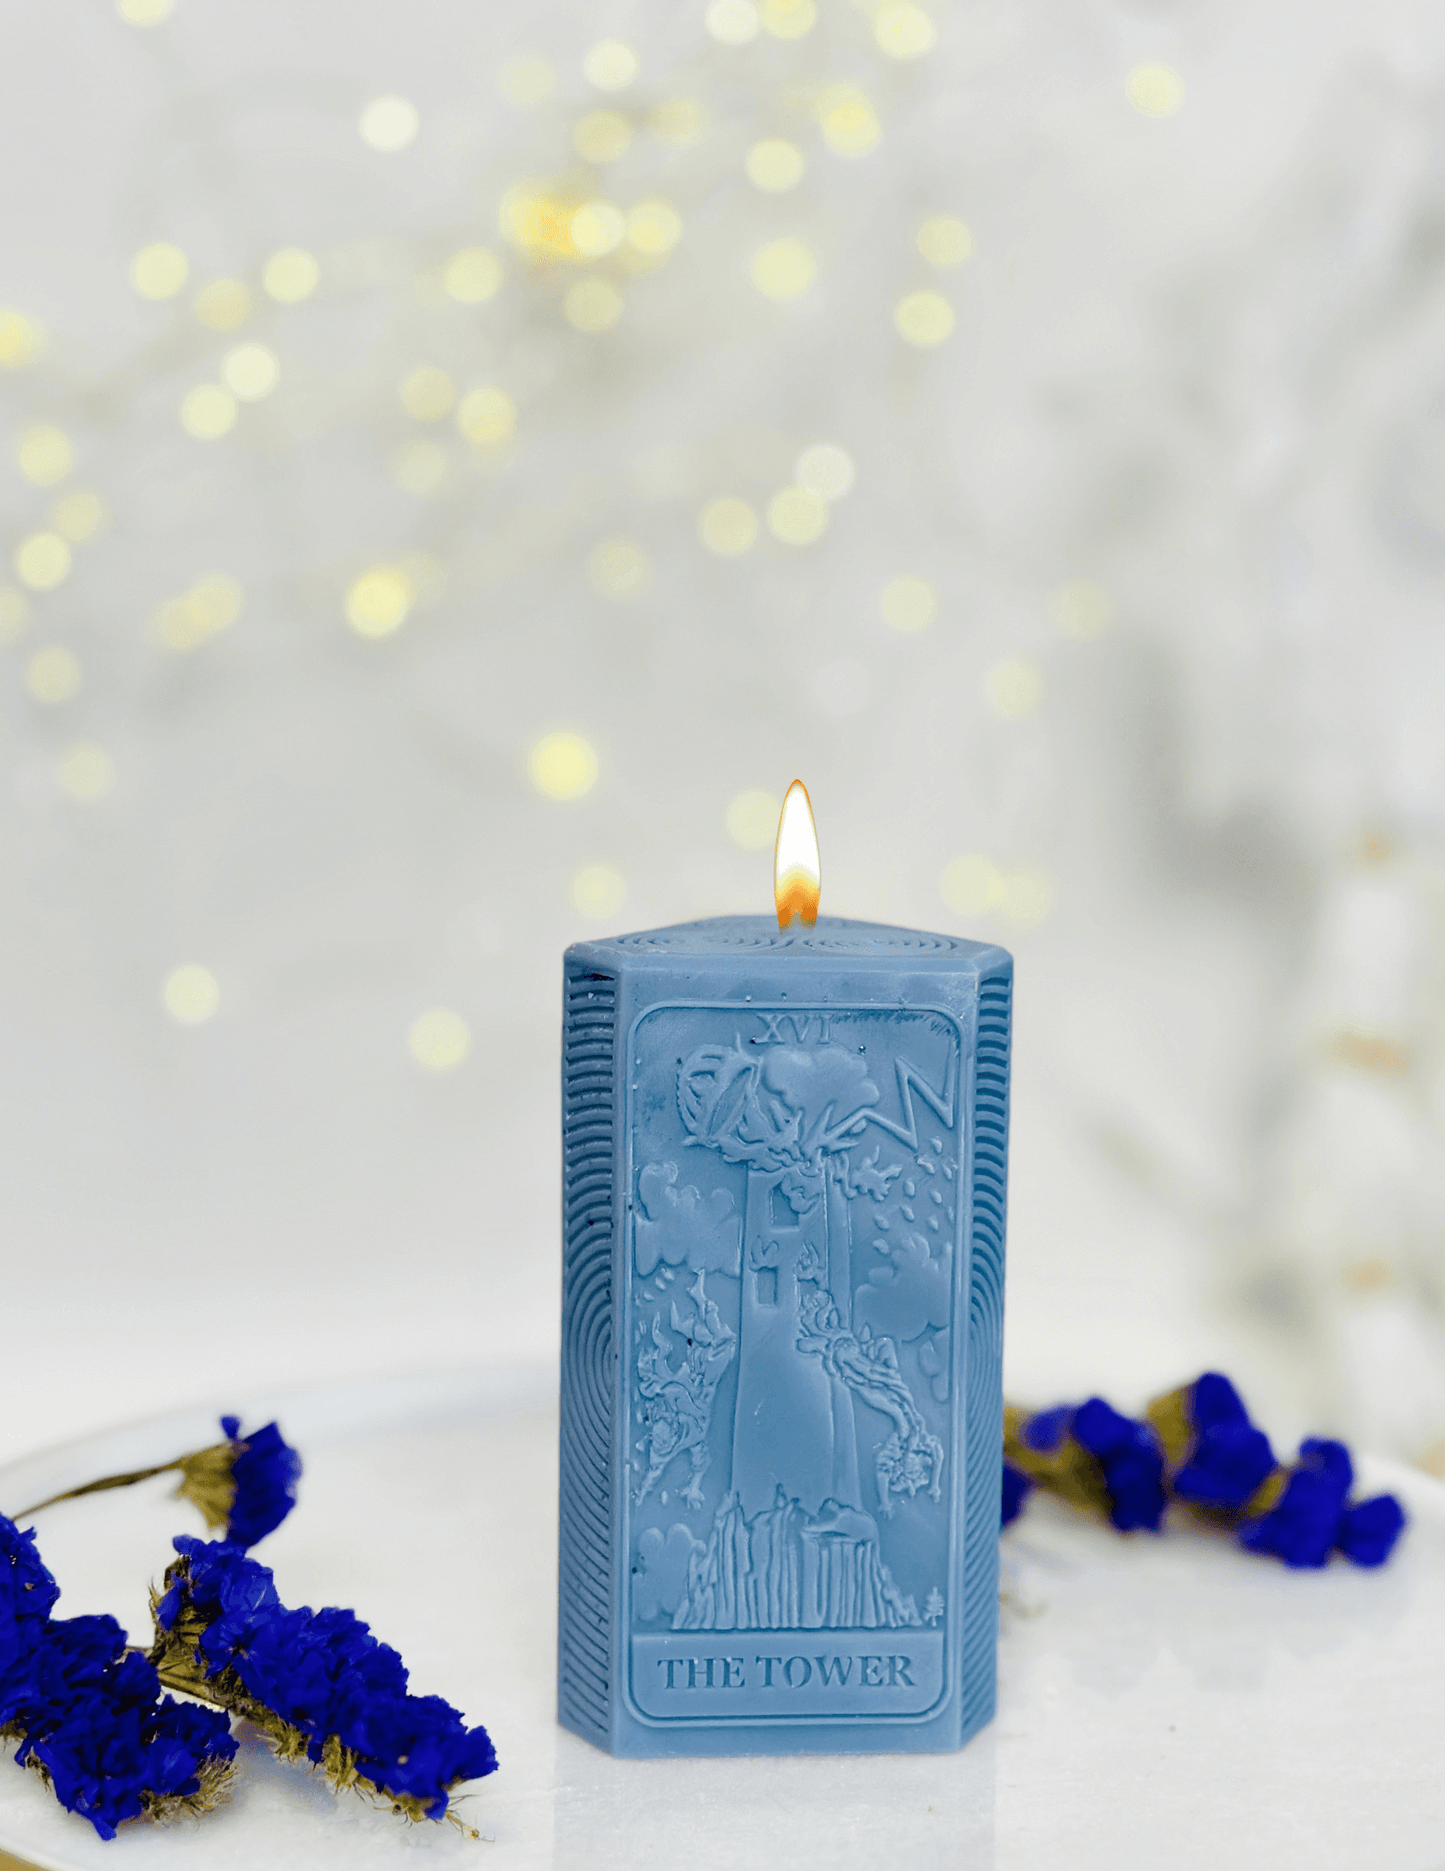 The Tower Tarot card and moon phases candle mold